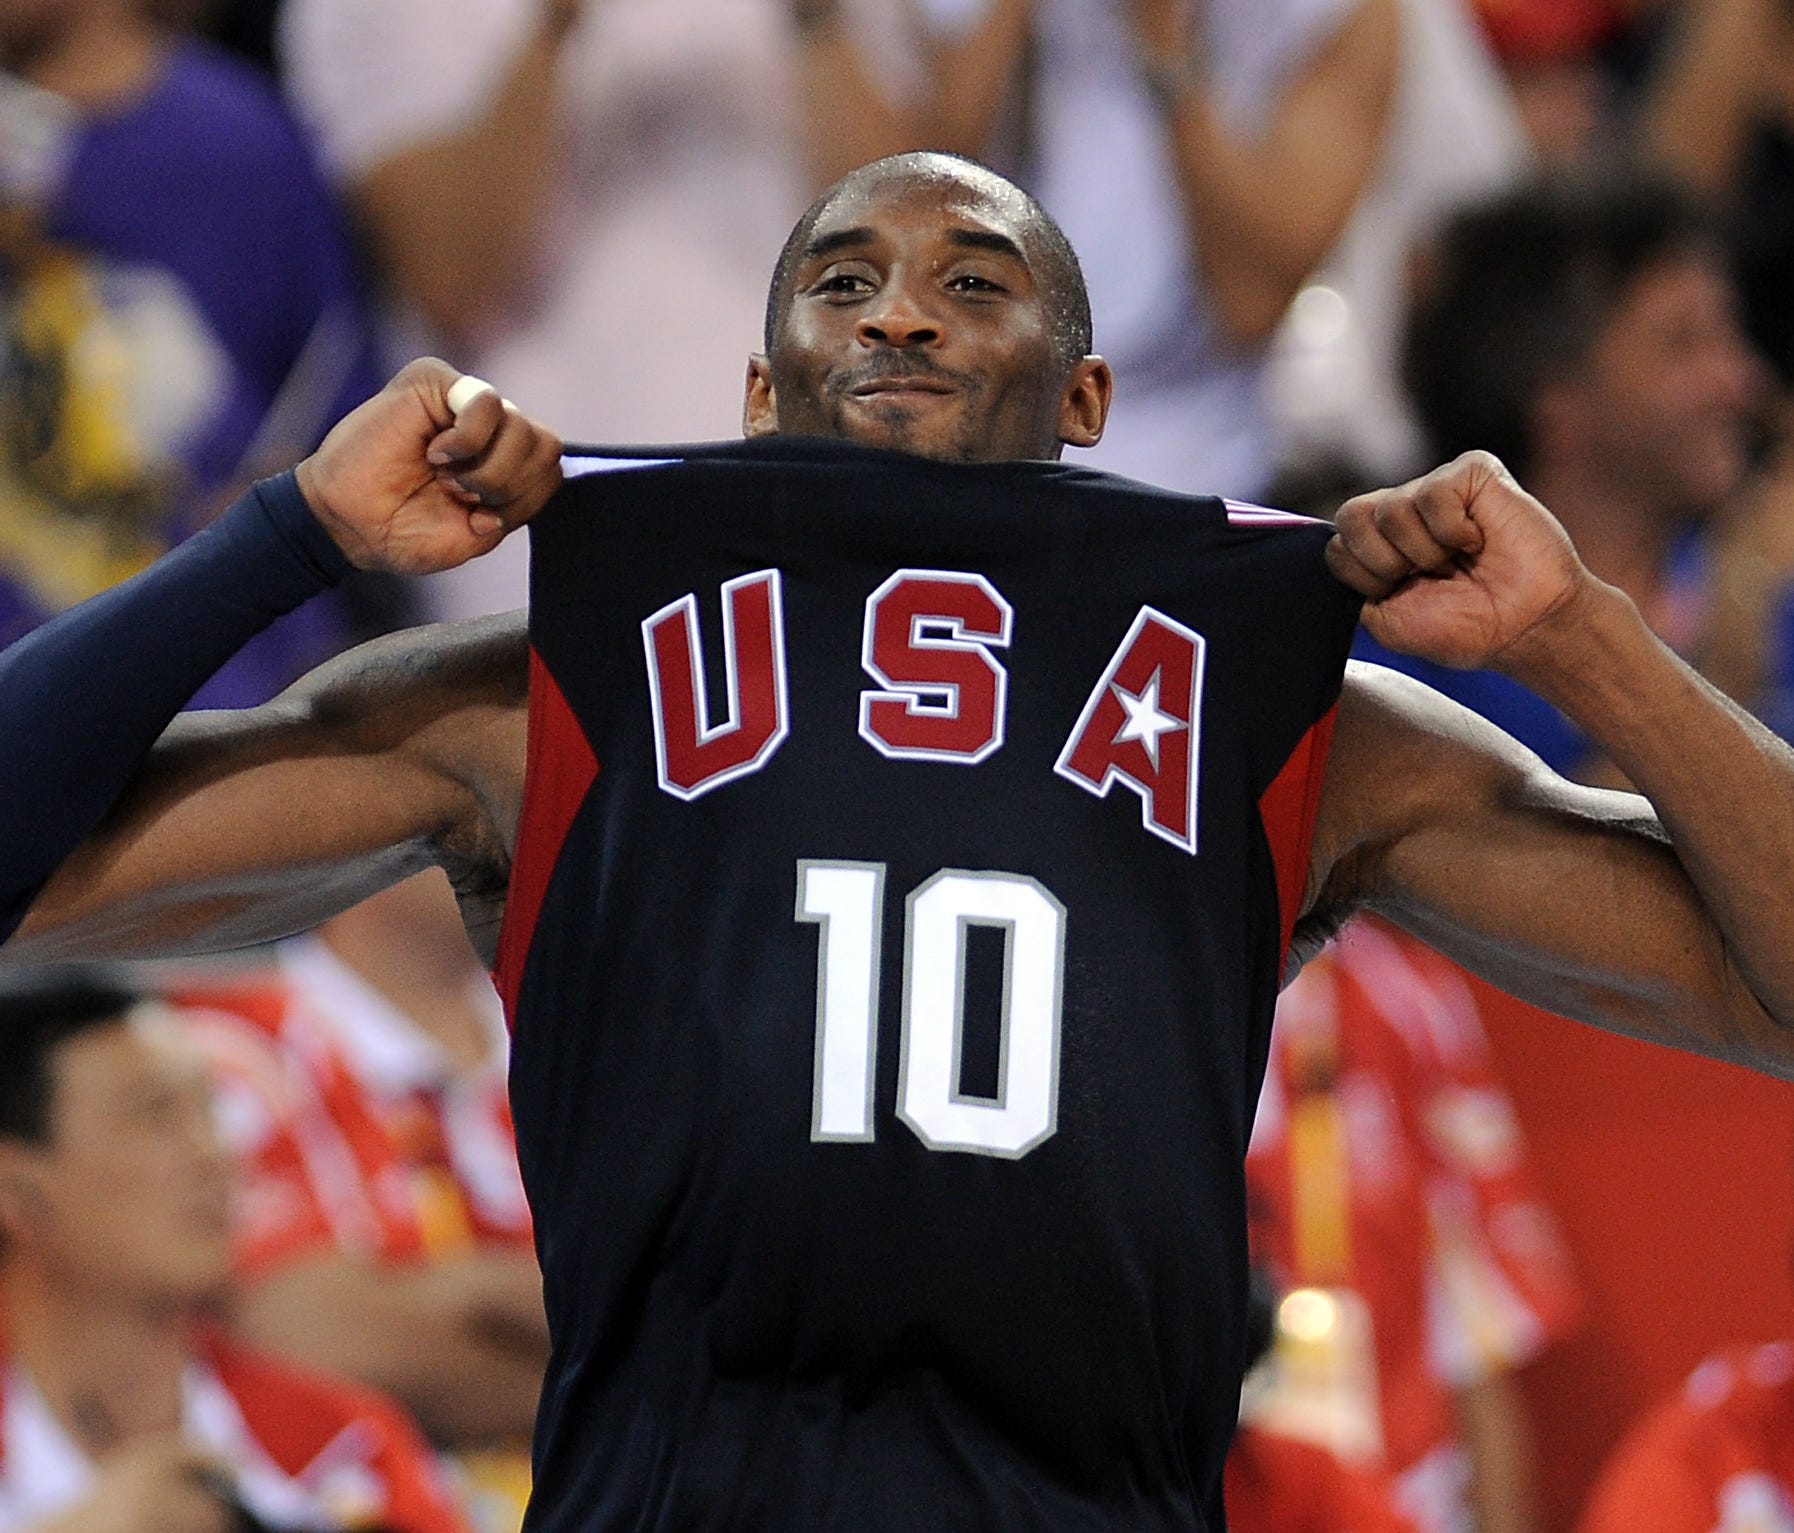 Mamba Out: My 10 Favorite Moments from Kobe's Last Game – Mentally ill  Conceived